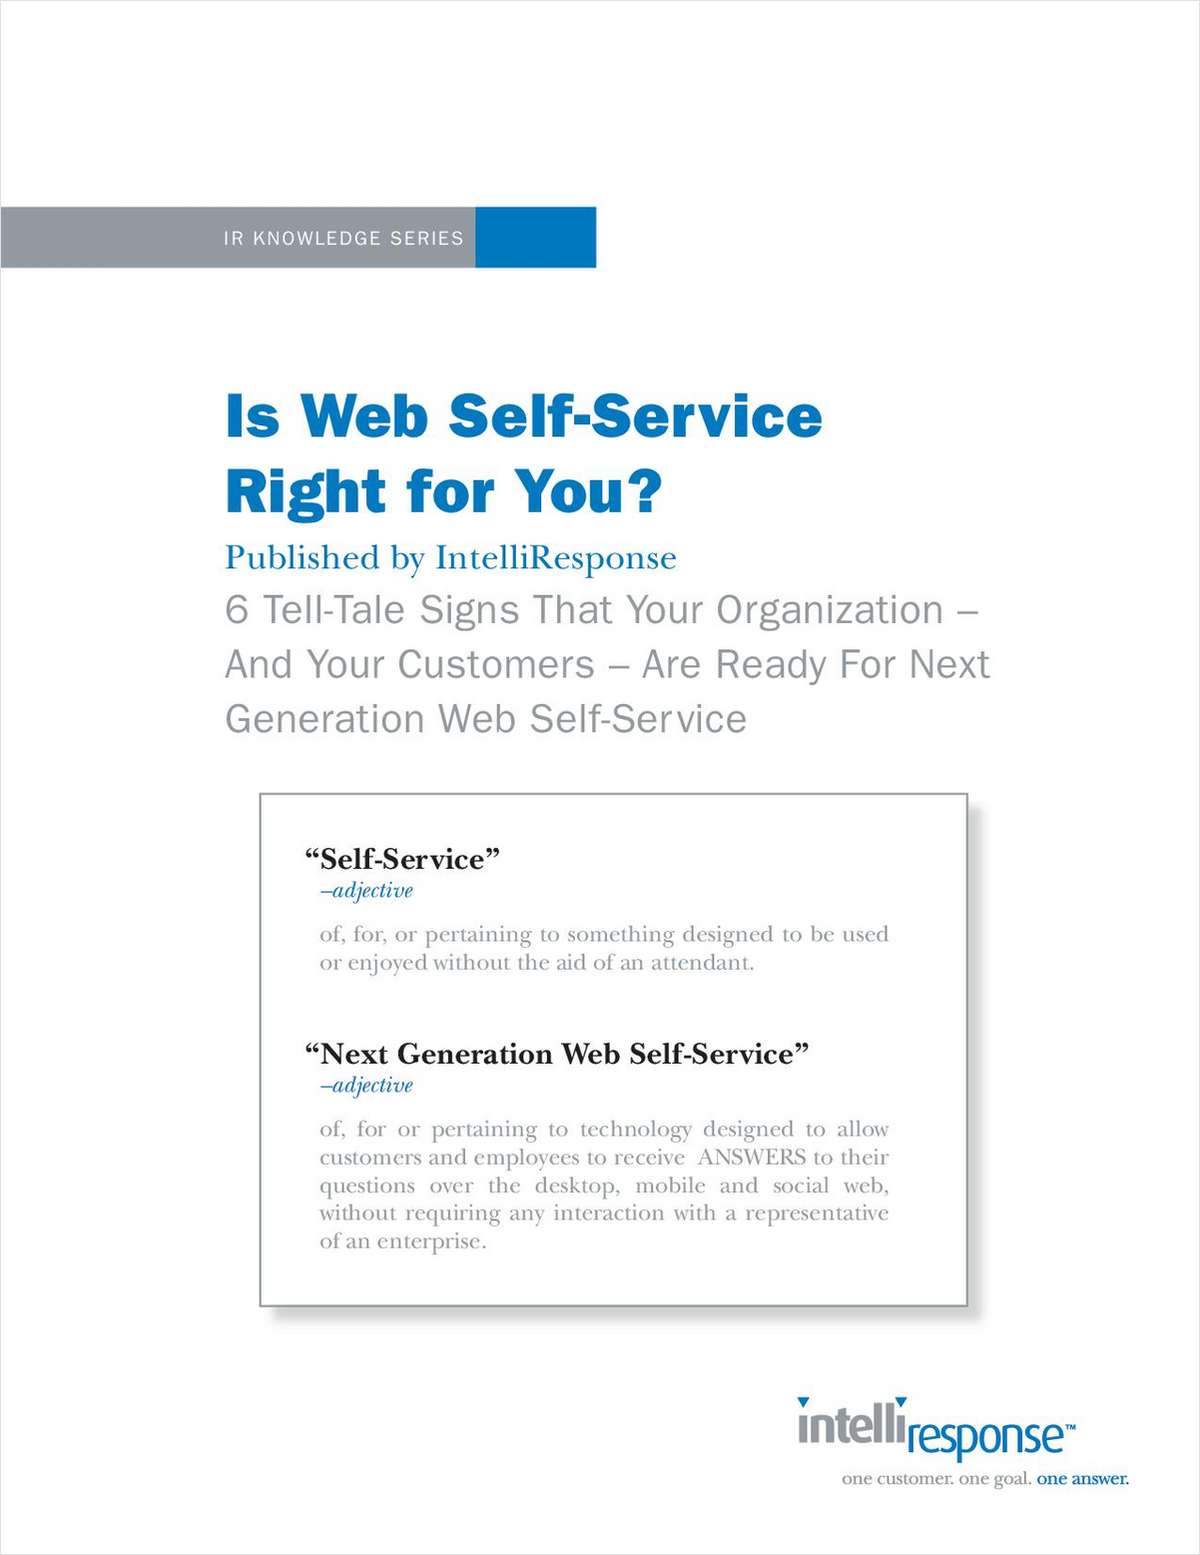 Is Web Self-Service Right for You?